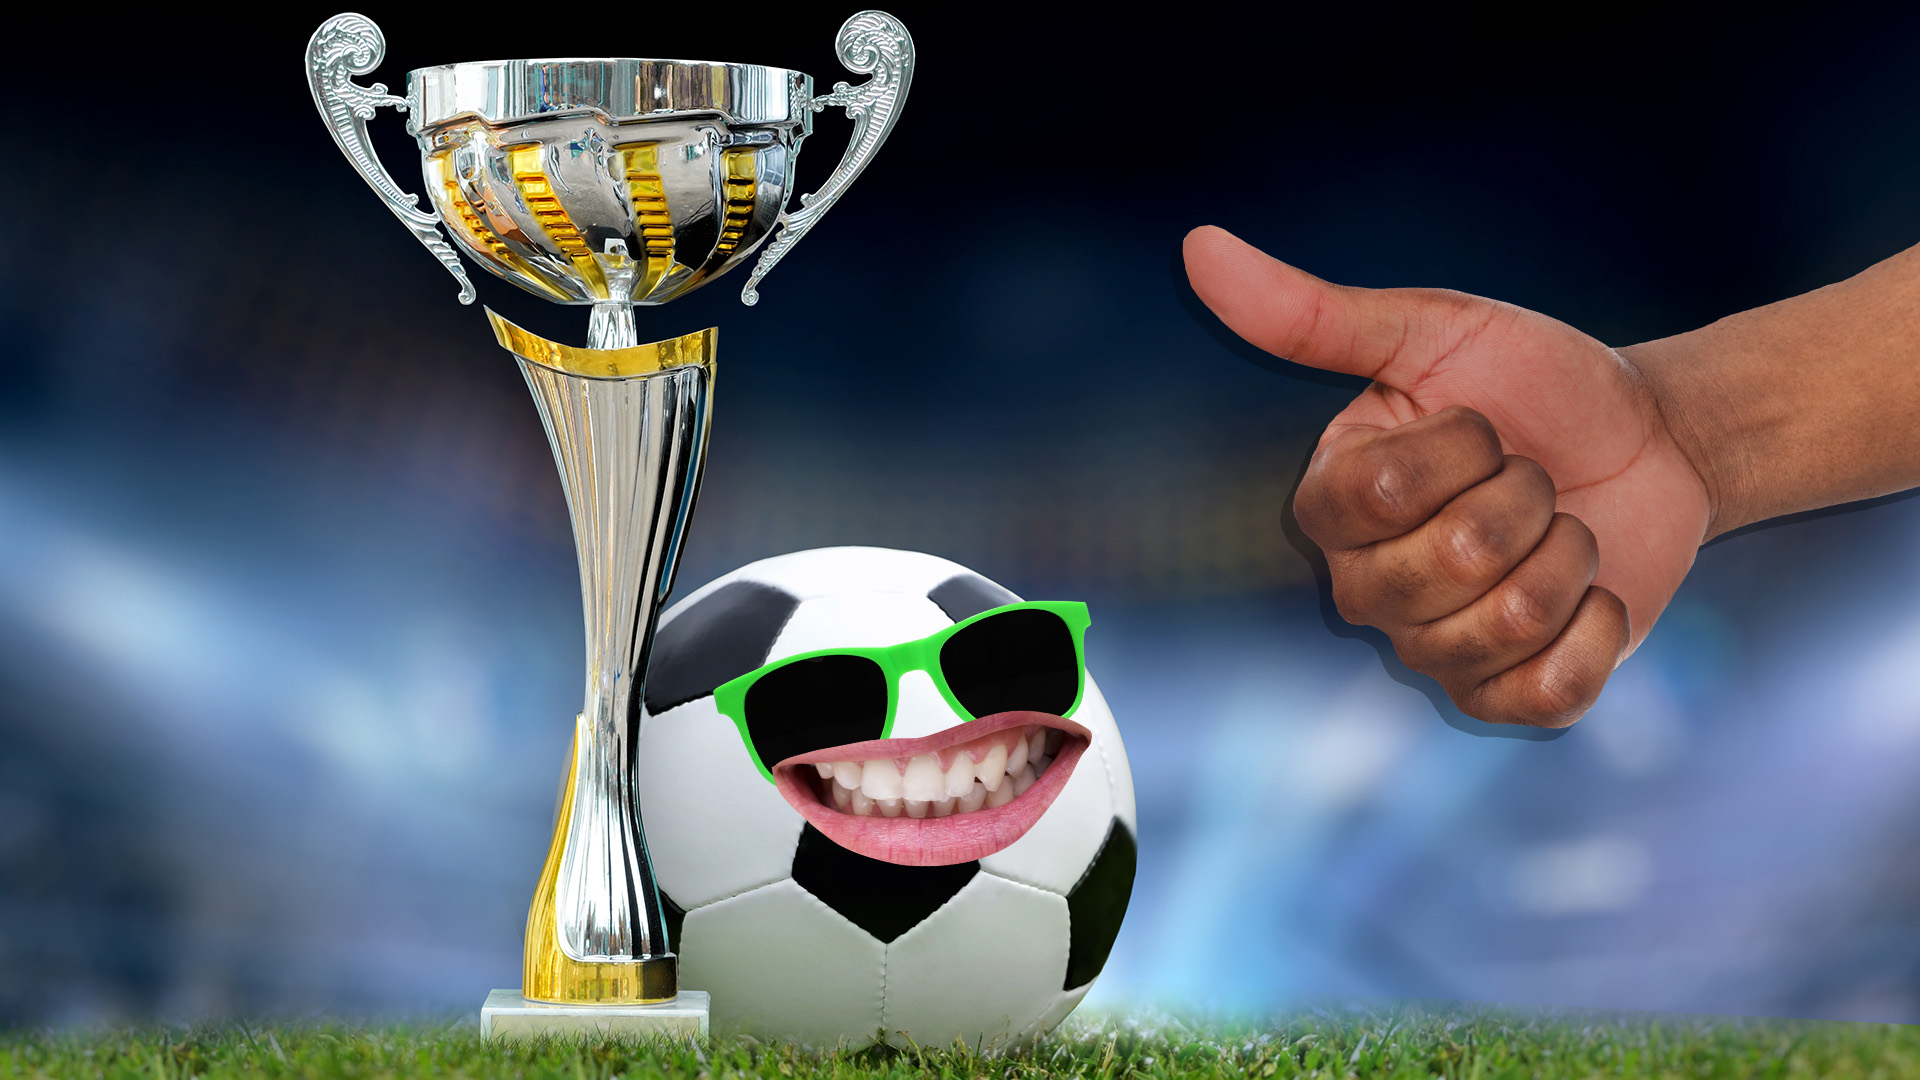 A person giving a thumbs up to a trophy and a football